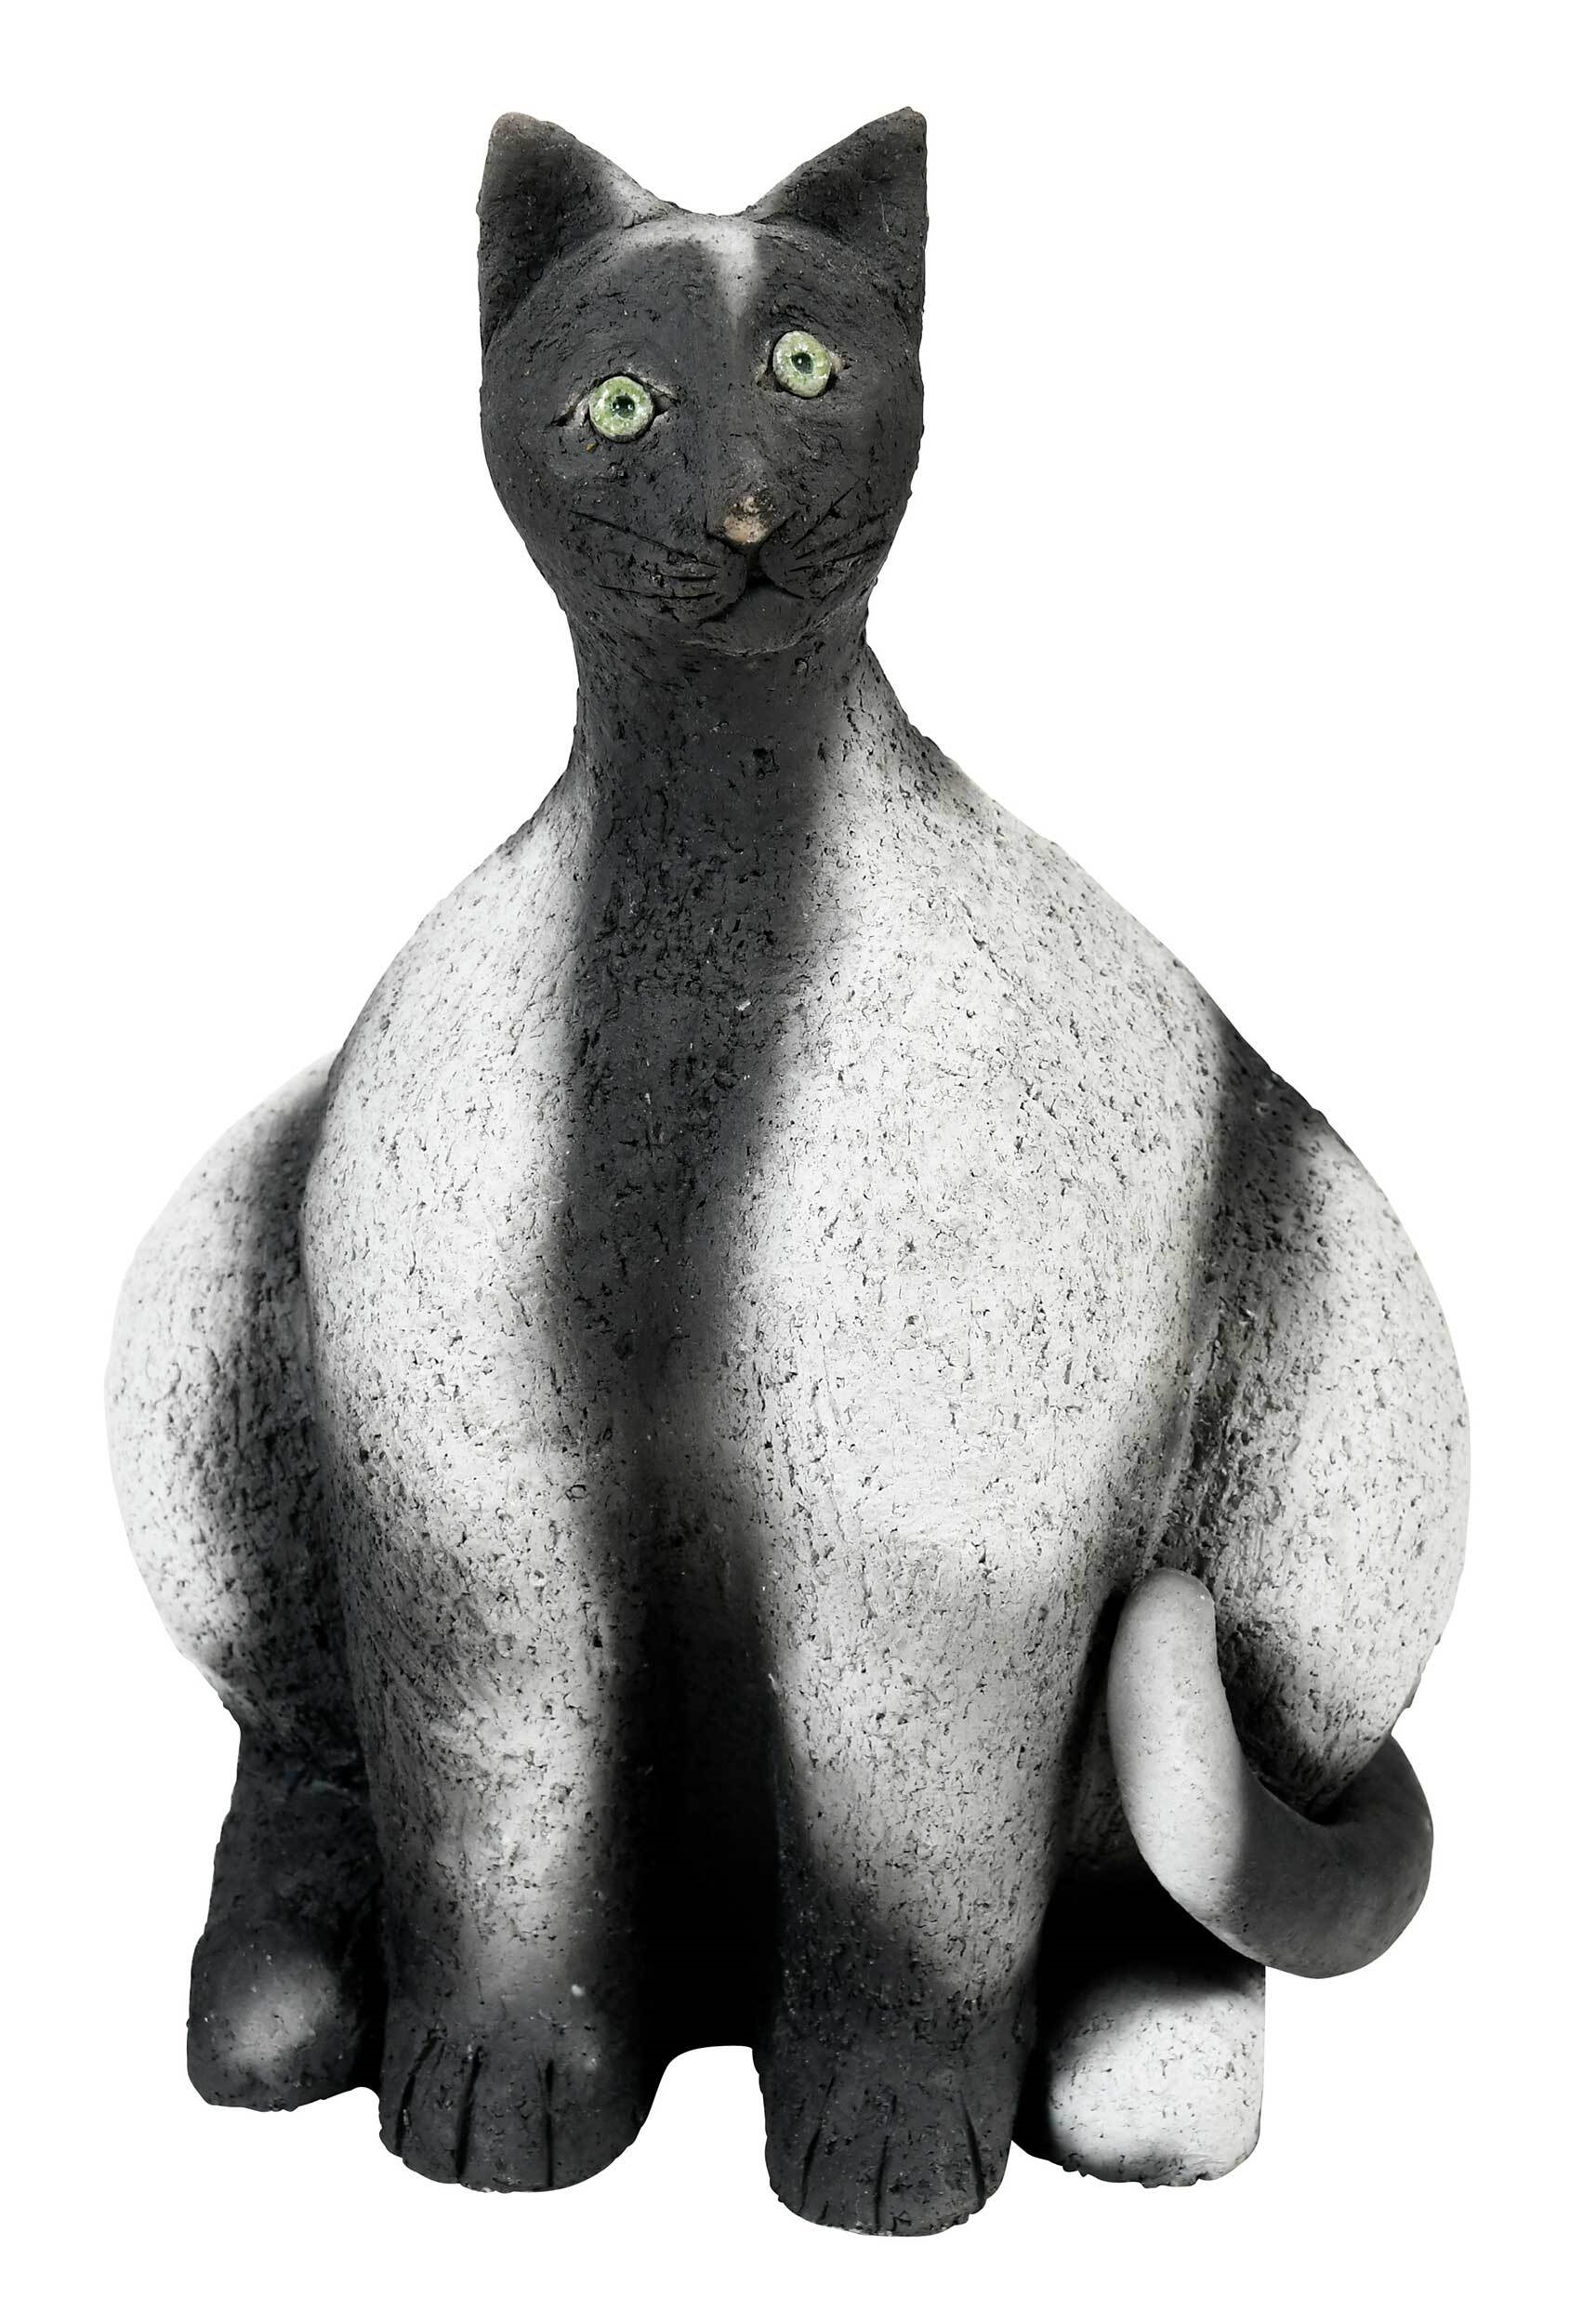 A Black and White Cat with Green Eyes - Jean-paul Bonnet